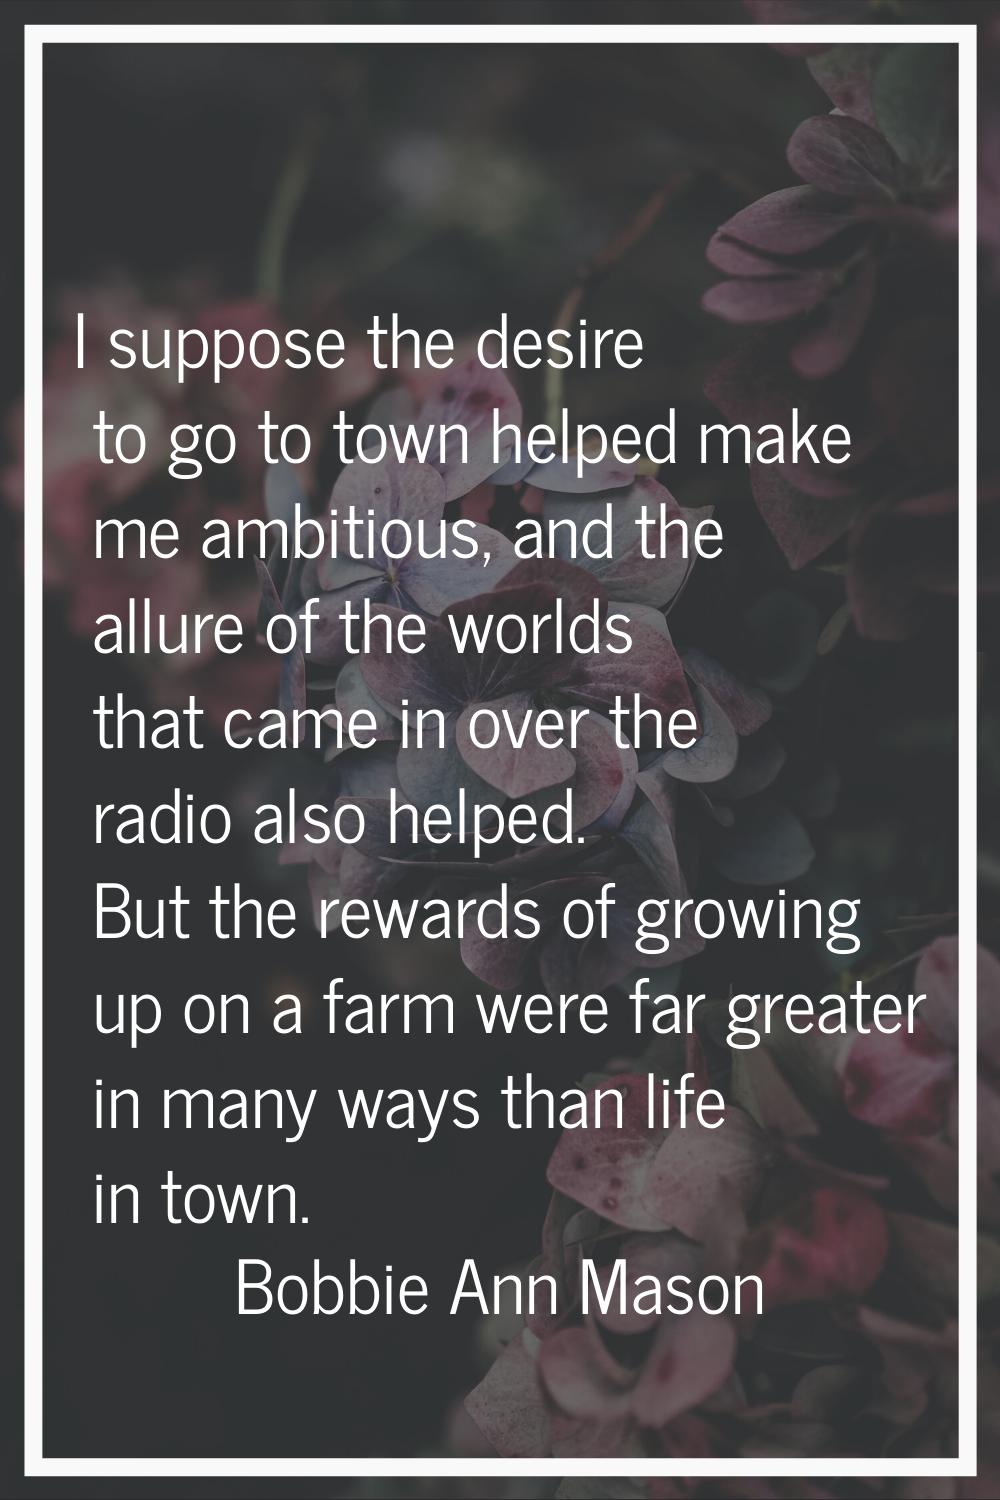 I suppose the desire to go to town helped make me ambitious, and the allure of the worlds that came